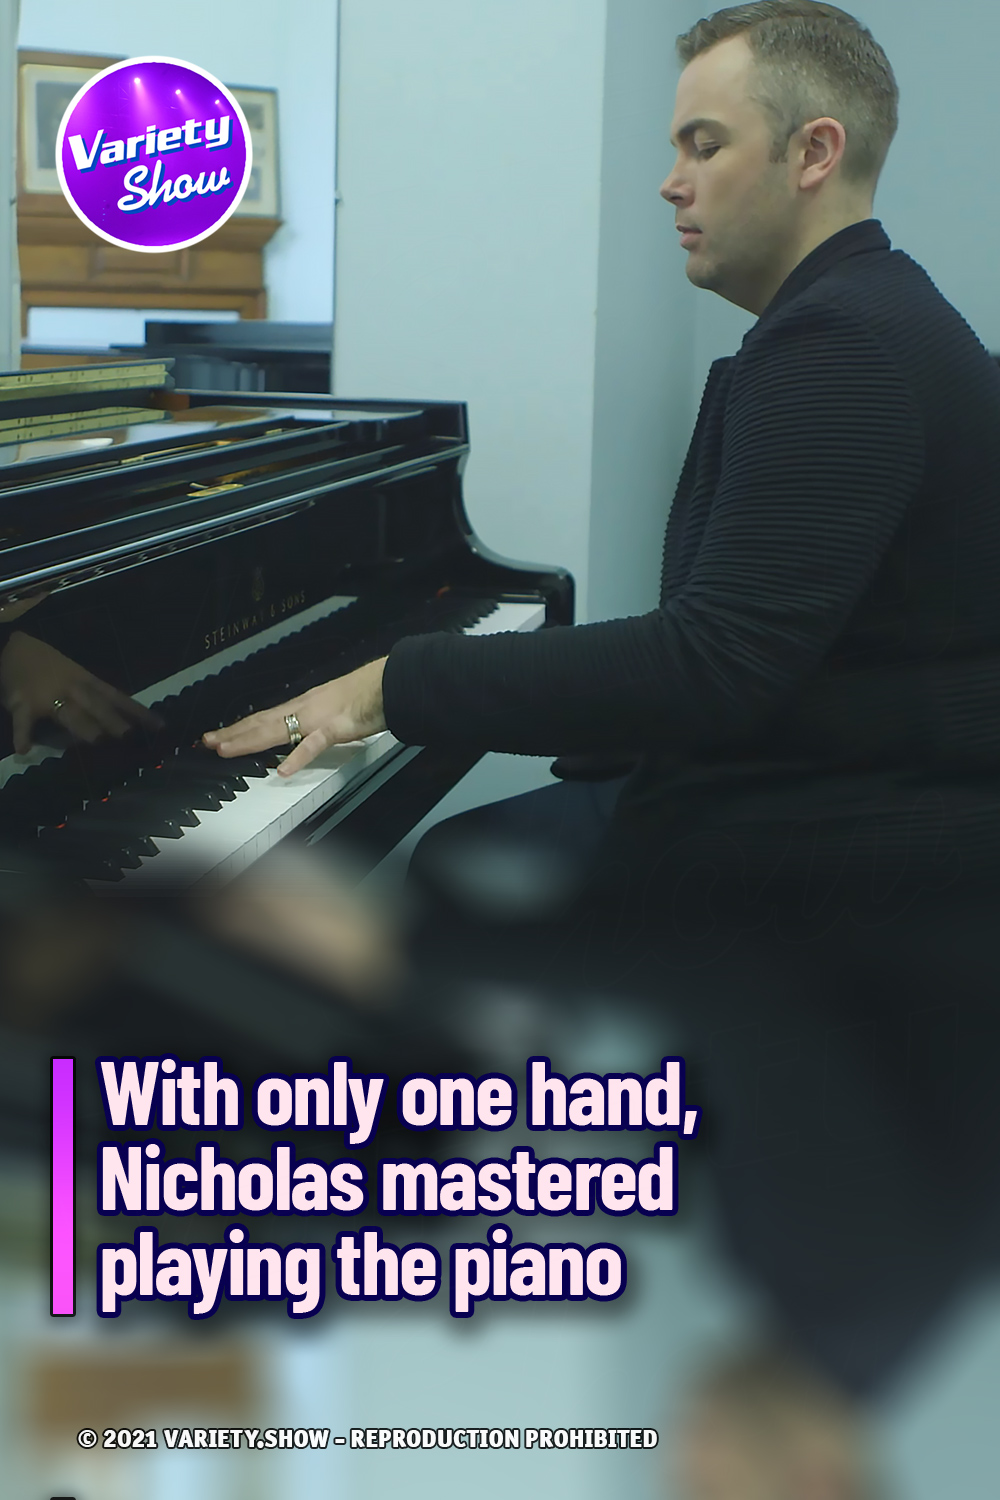 With only one hand, Nicholas mastered playing the piano